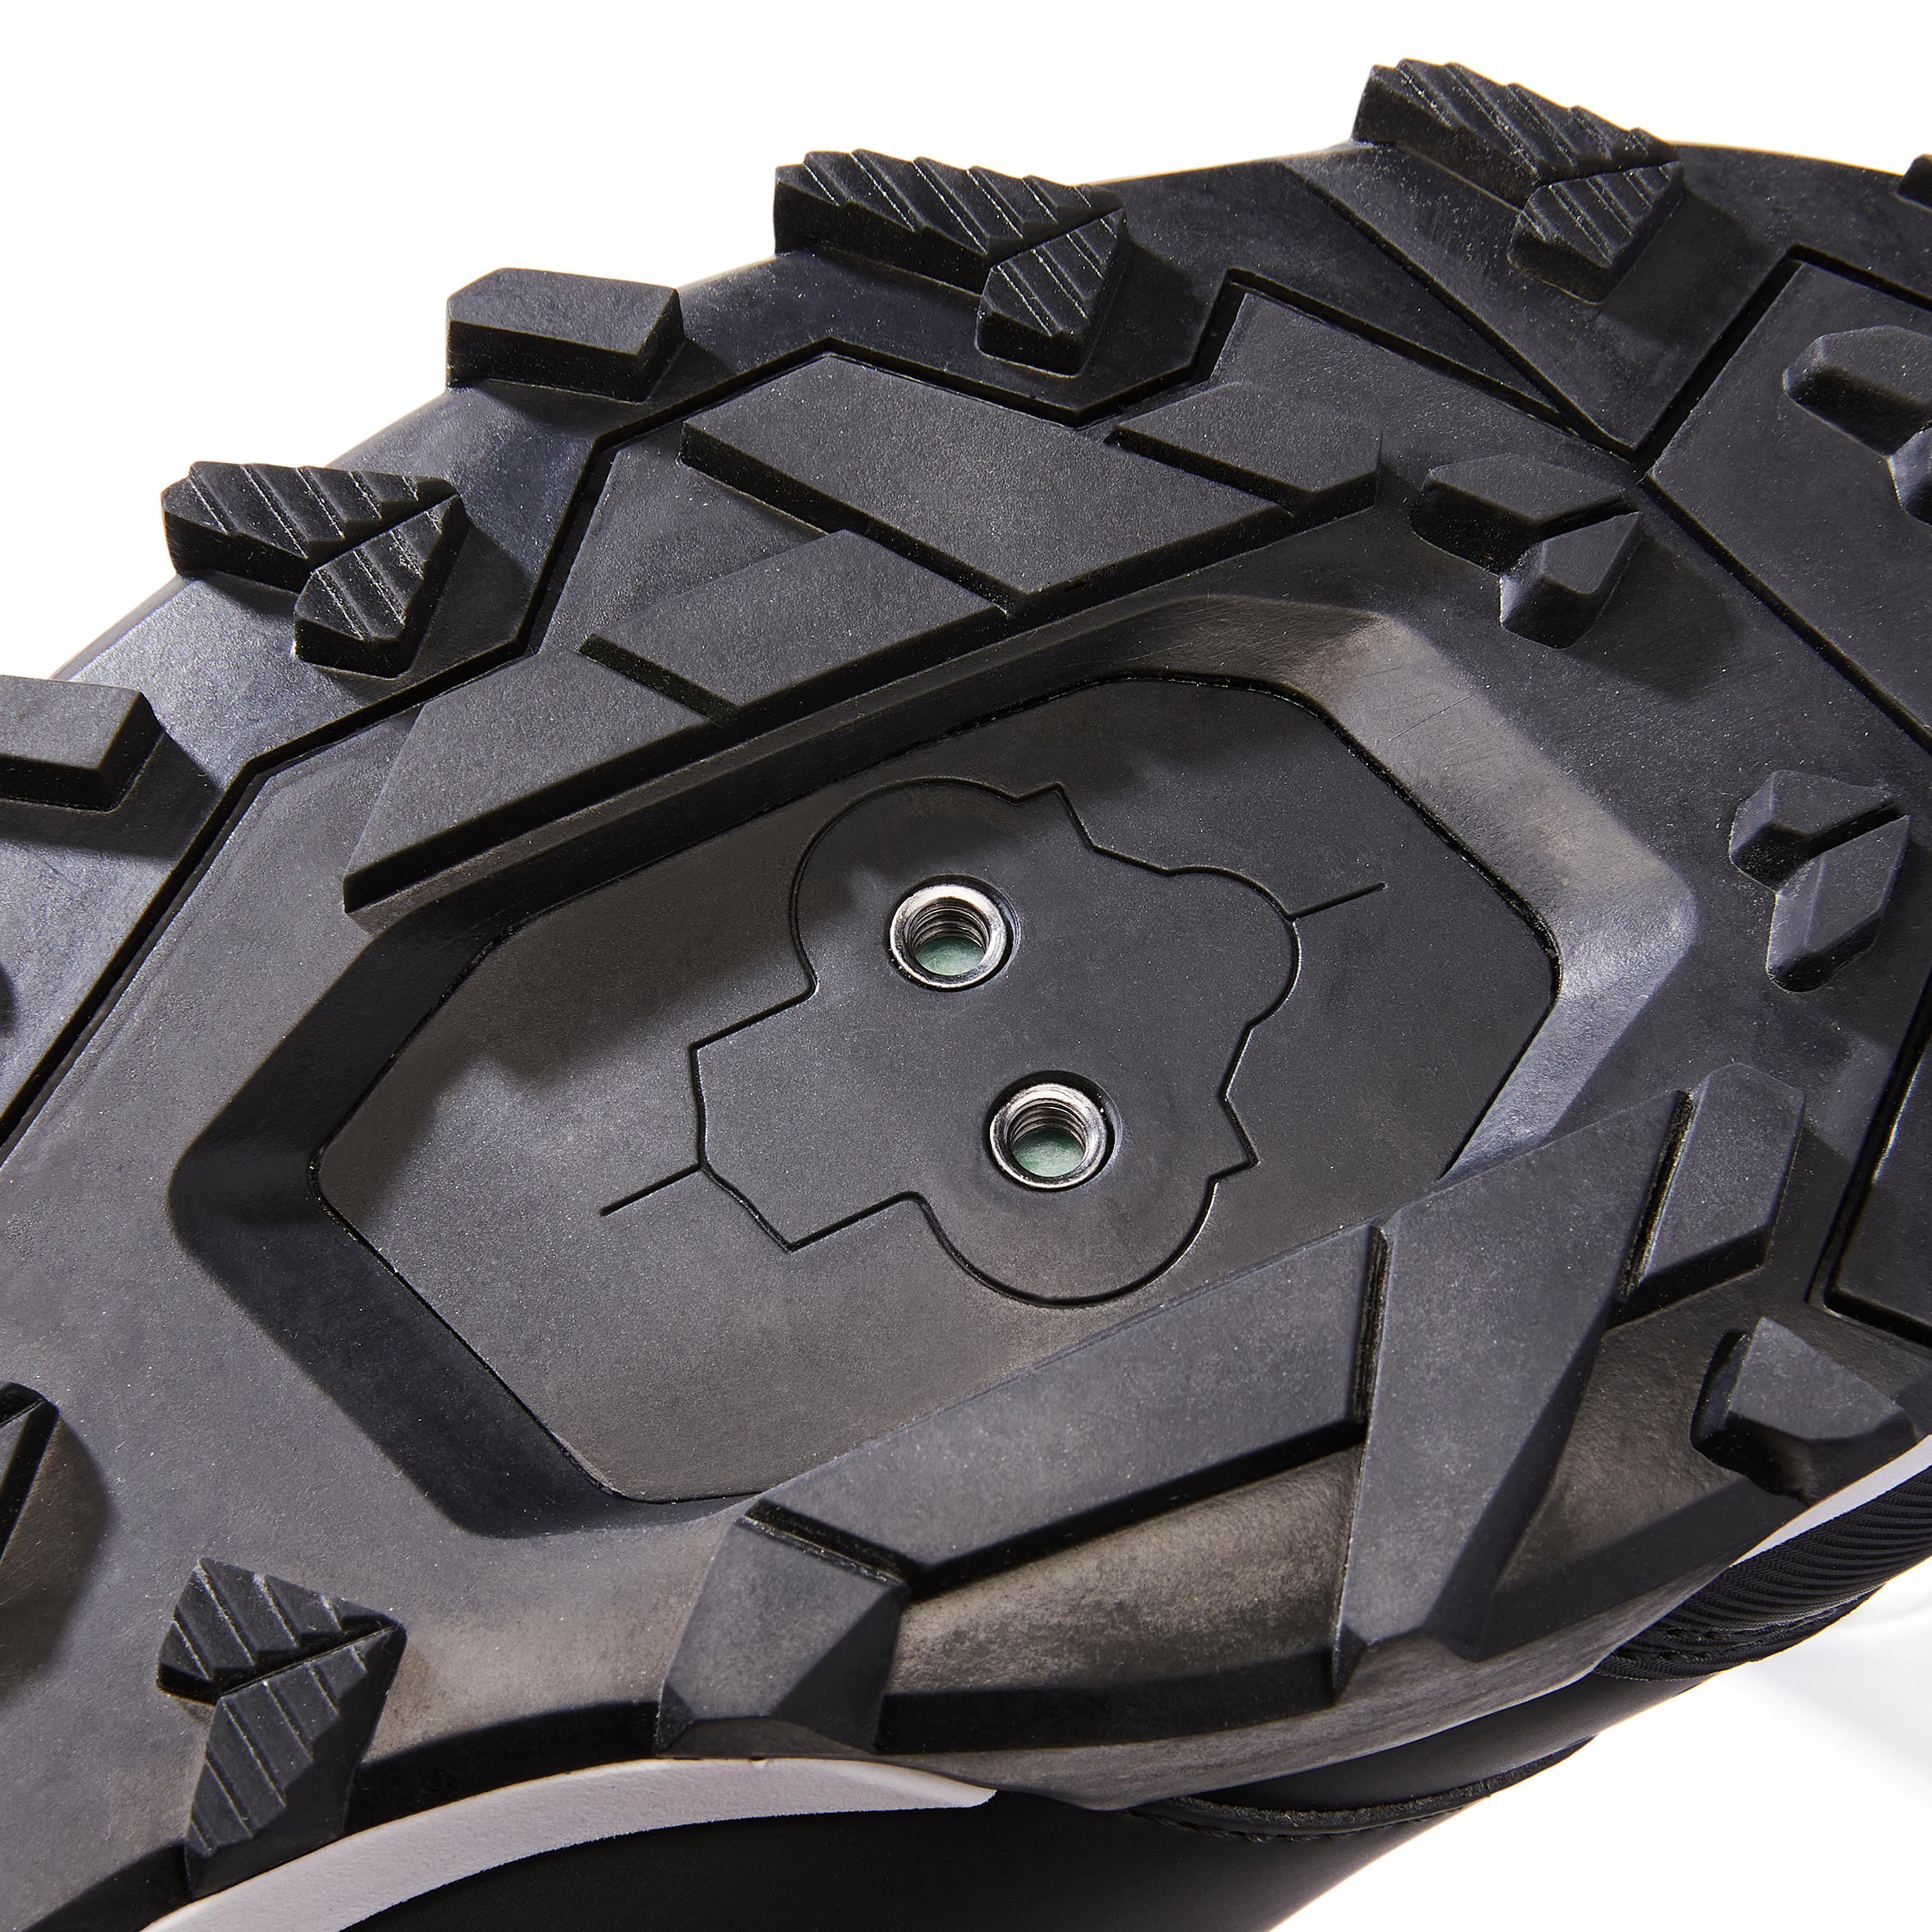 fixing cleats to cycling shoes